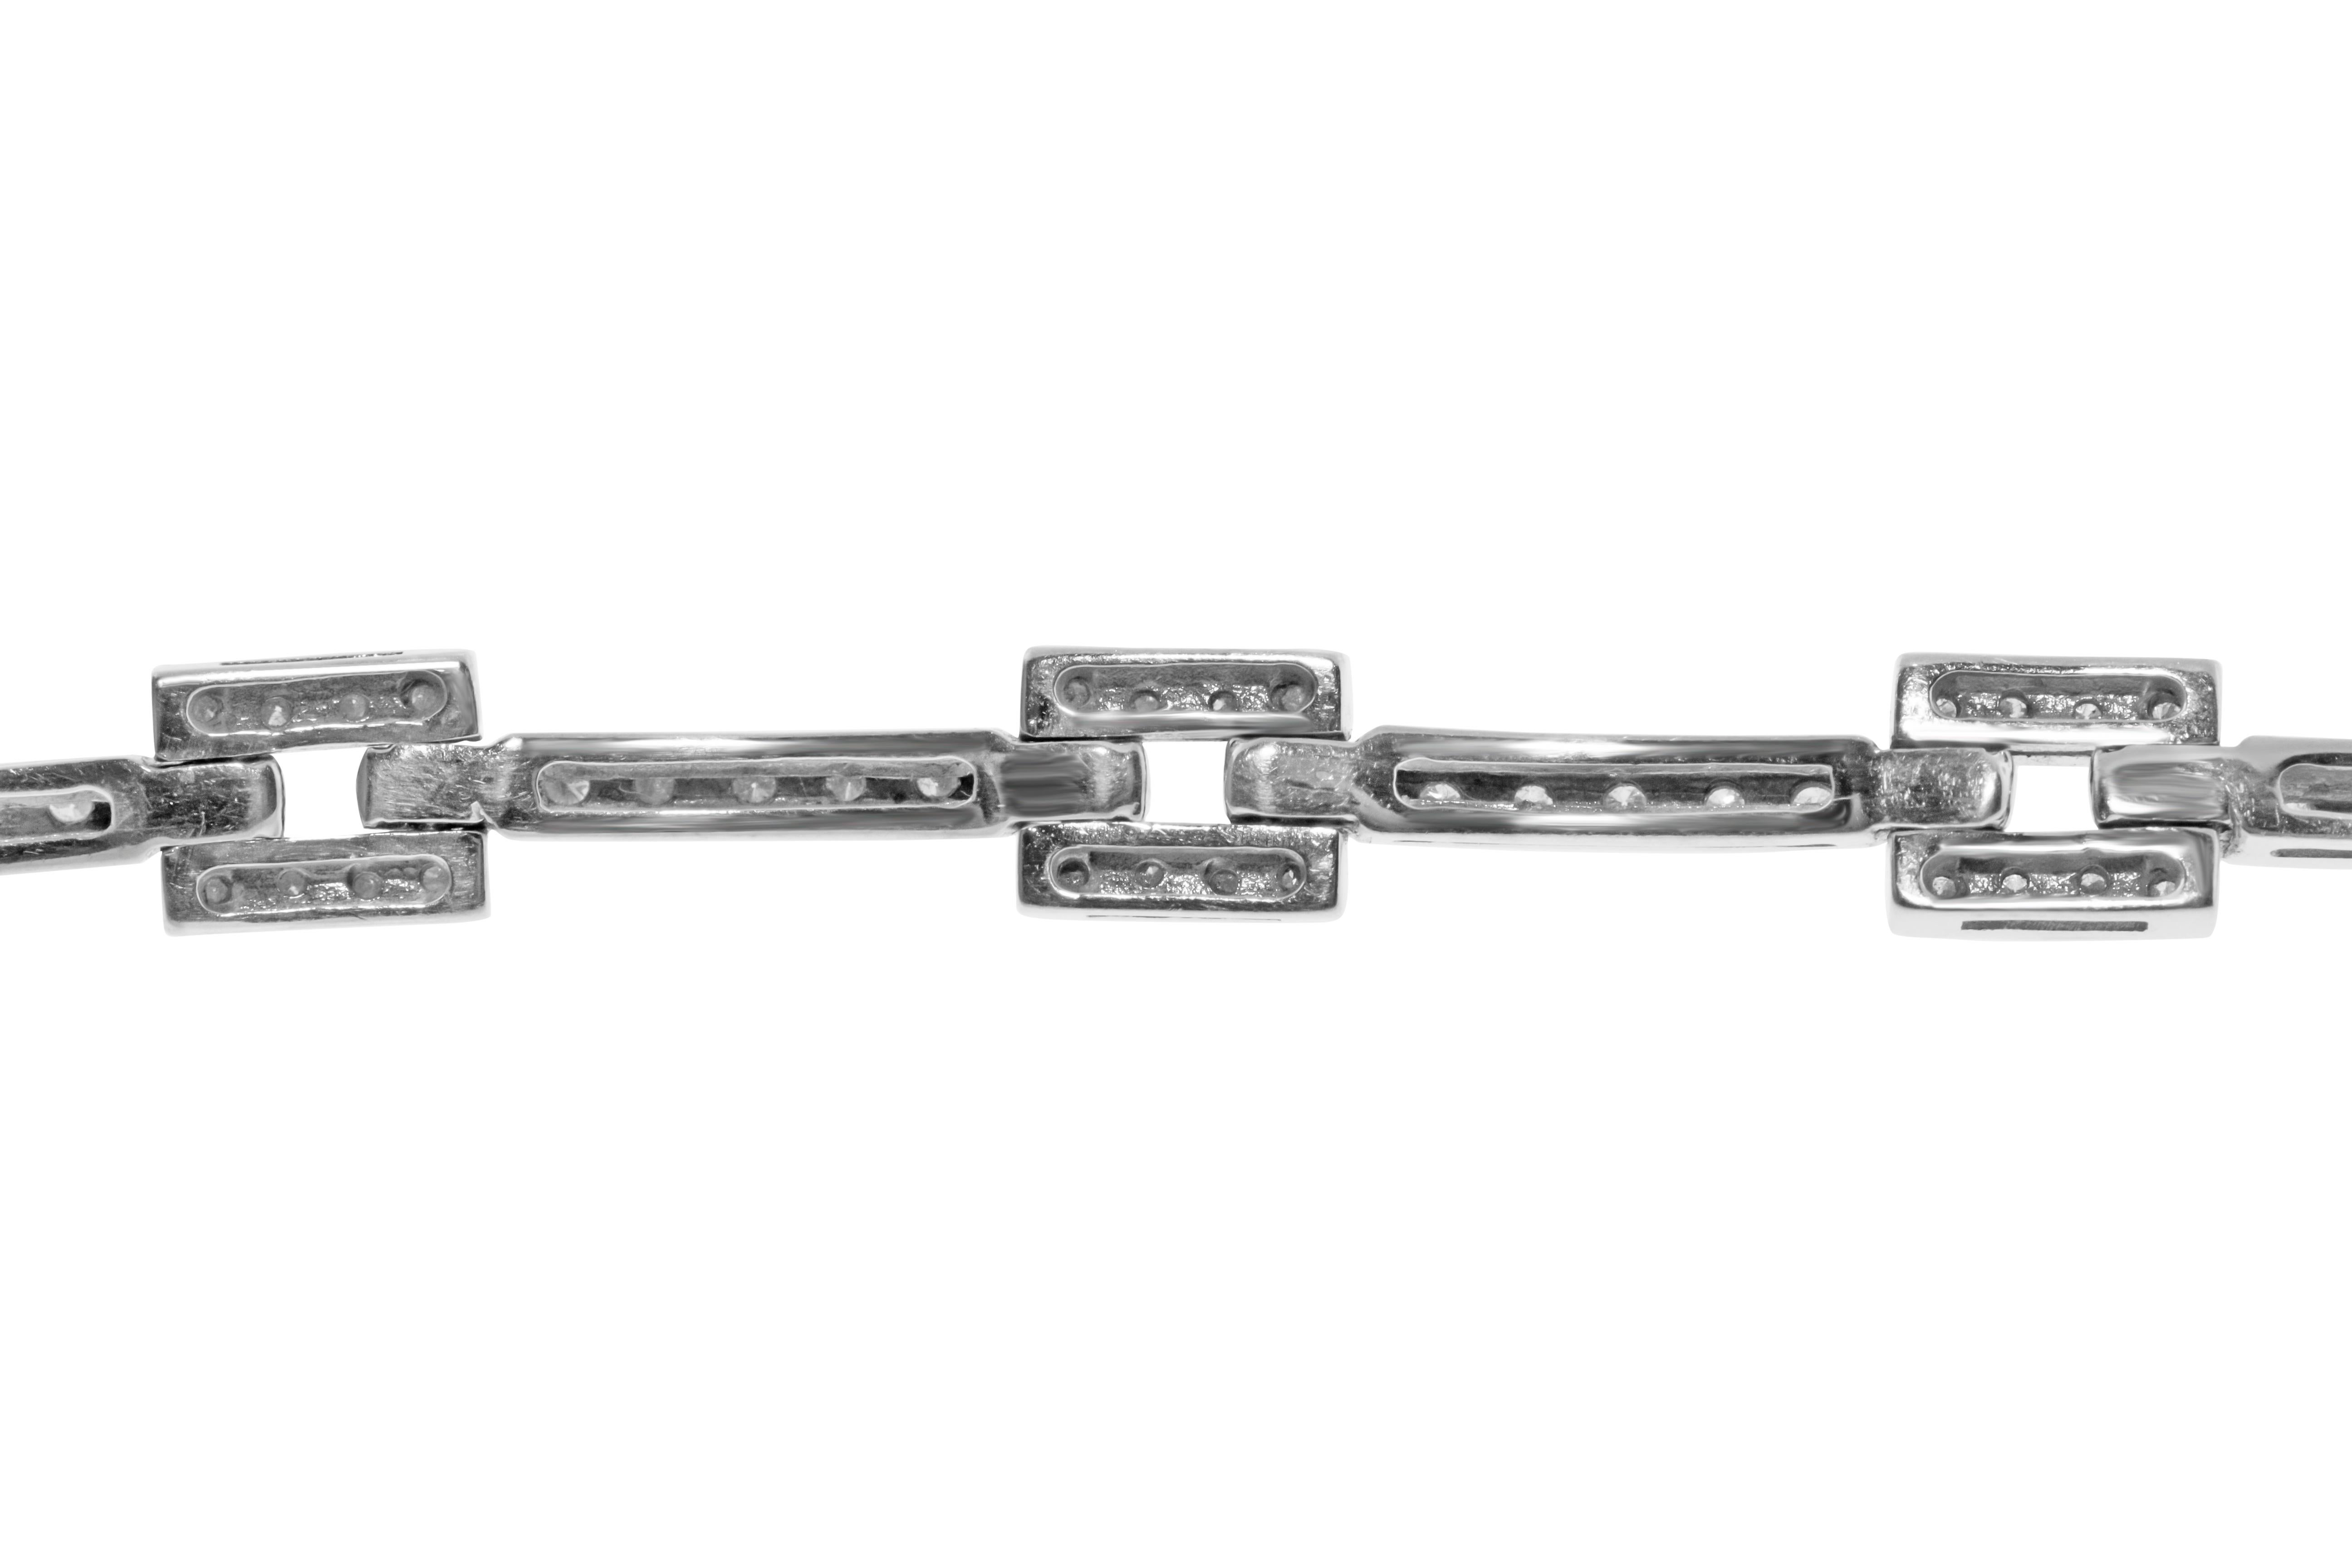 Rectangular link diamond bracelet featuring 130 round G-H VS diamonds set in 14.5 grams of white gold. Made in Italy. 7.5 inch length.

Can be sized down upon request. 

Viewings available in our NYC showroom by appointment.